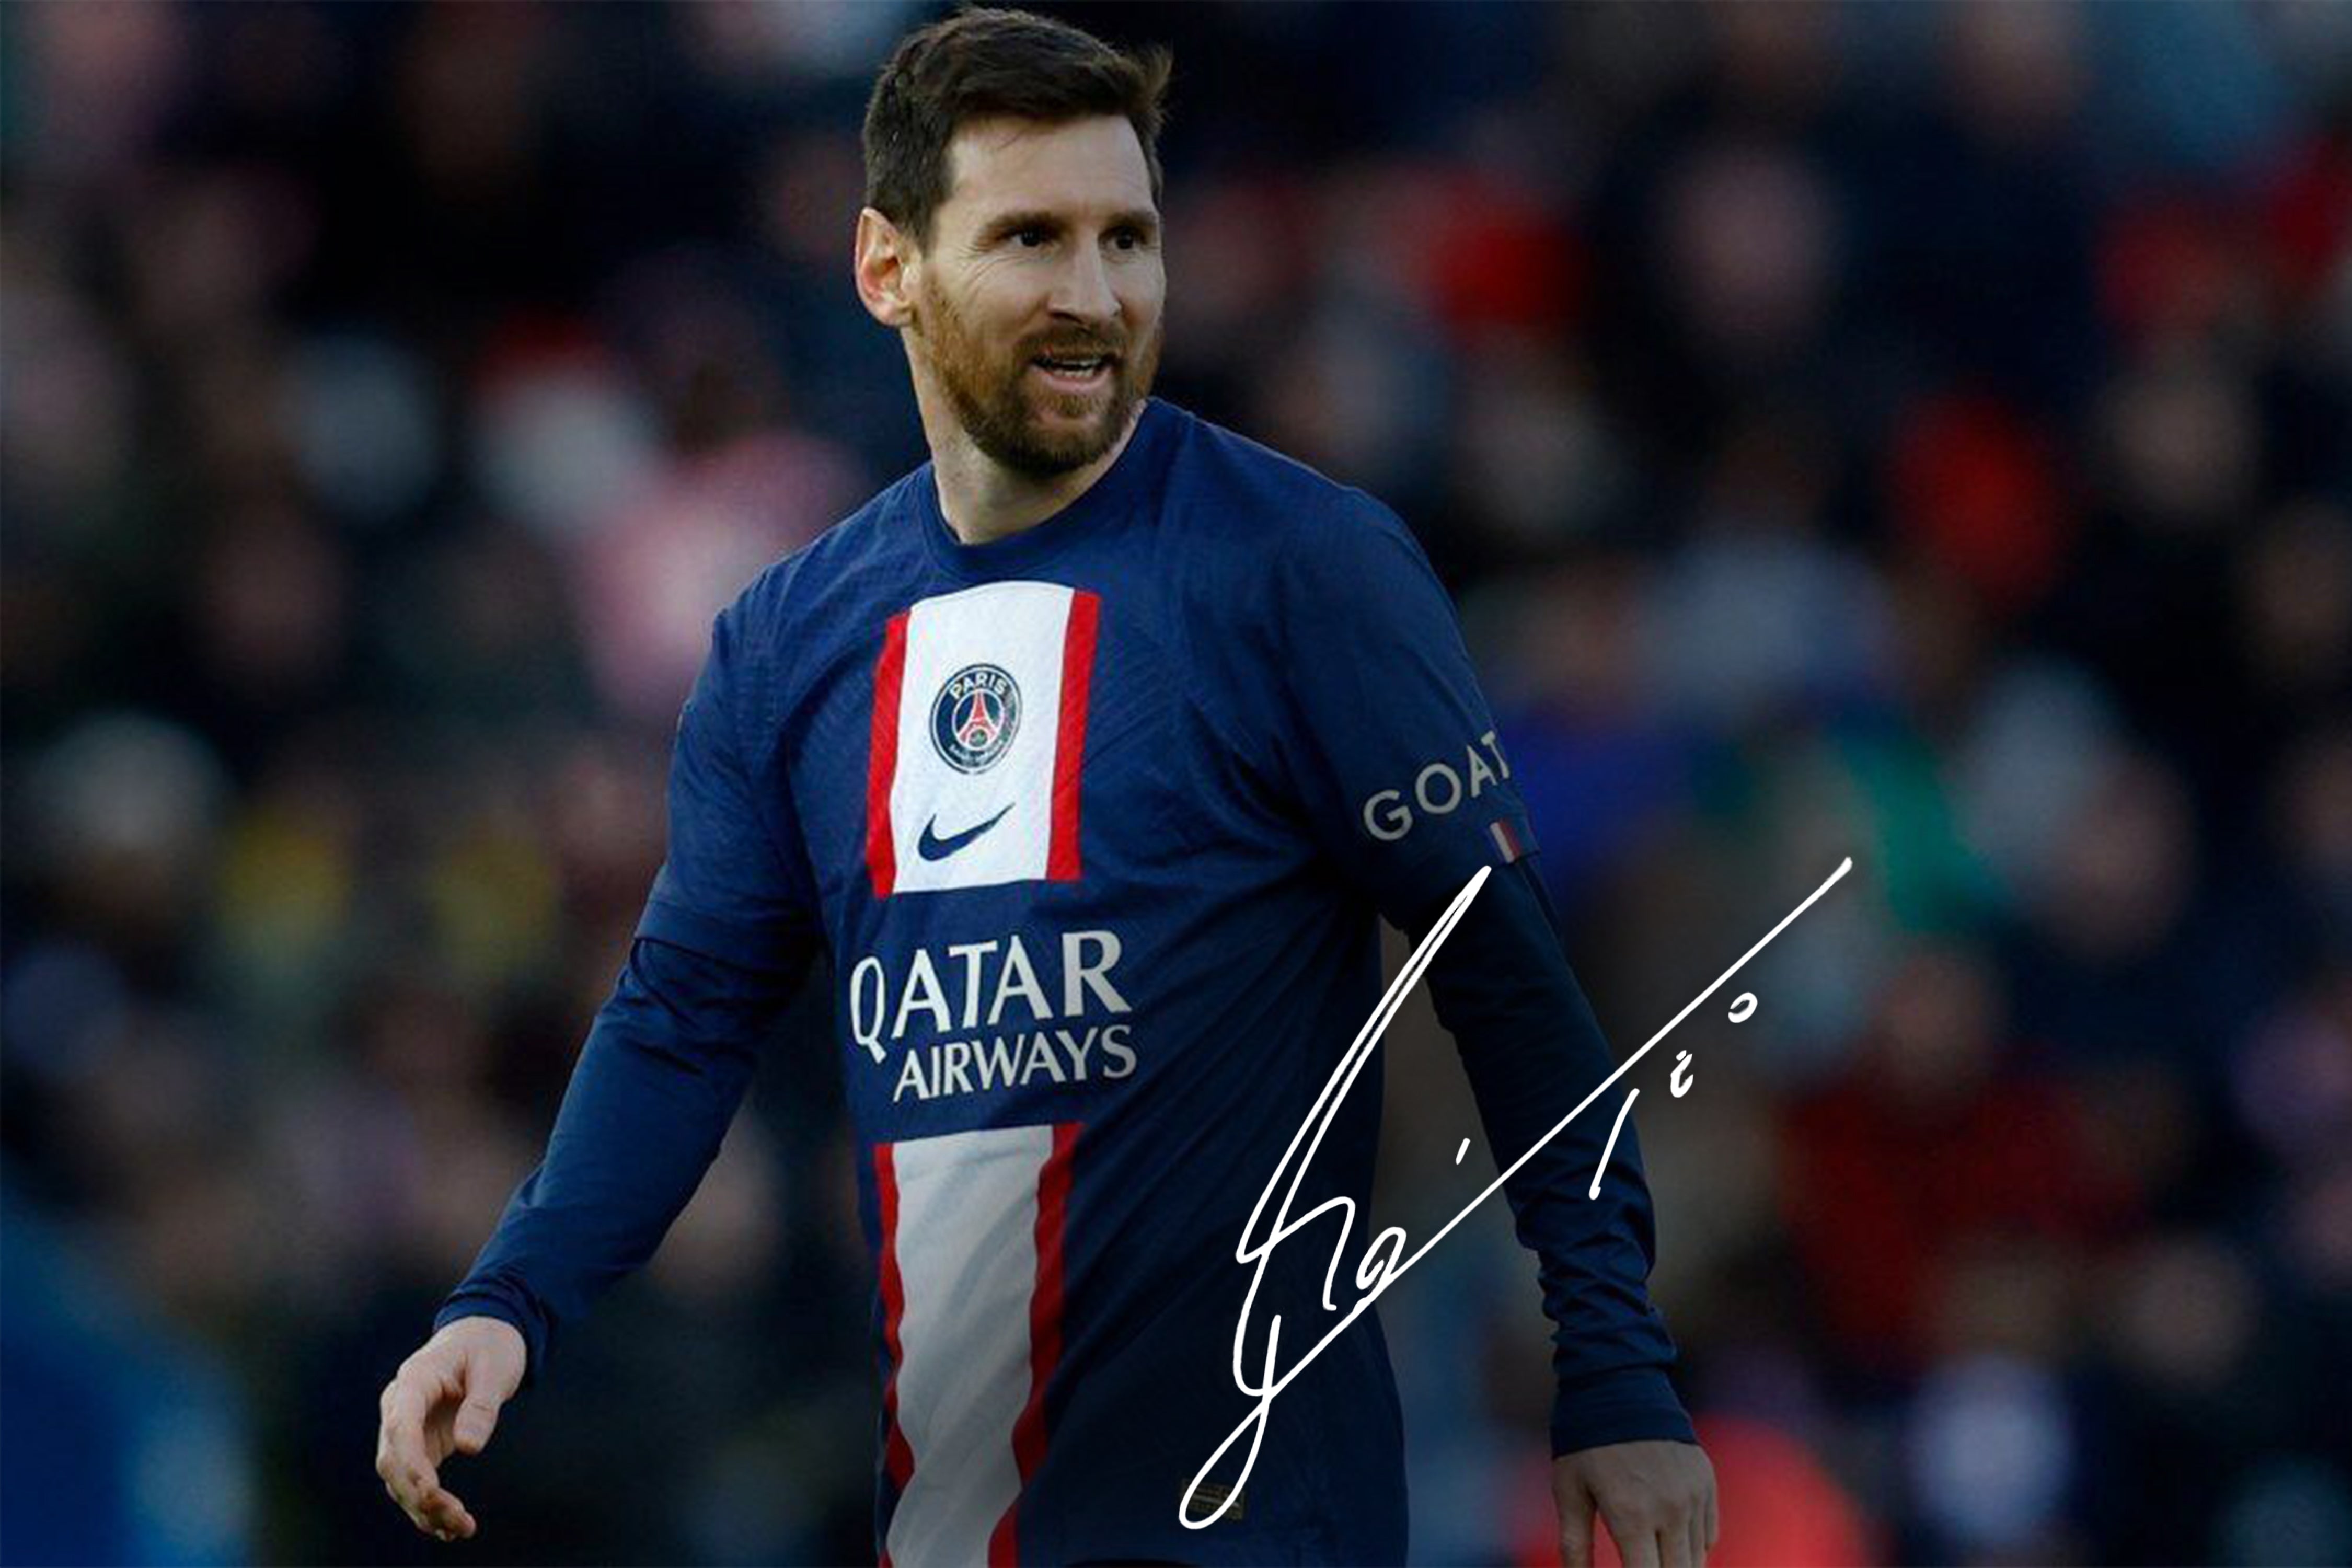 Messi far from top spot on most valuable player list